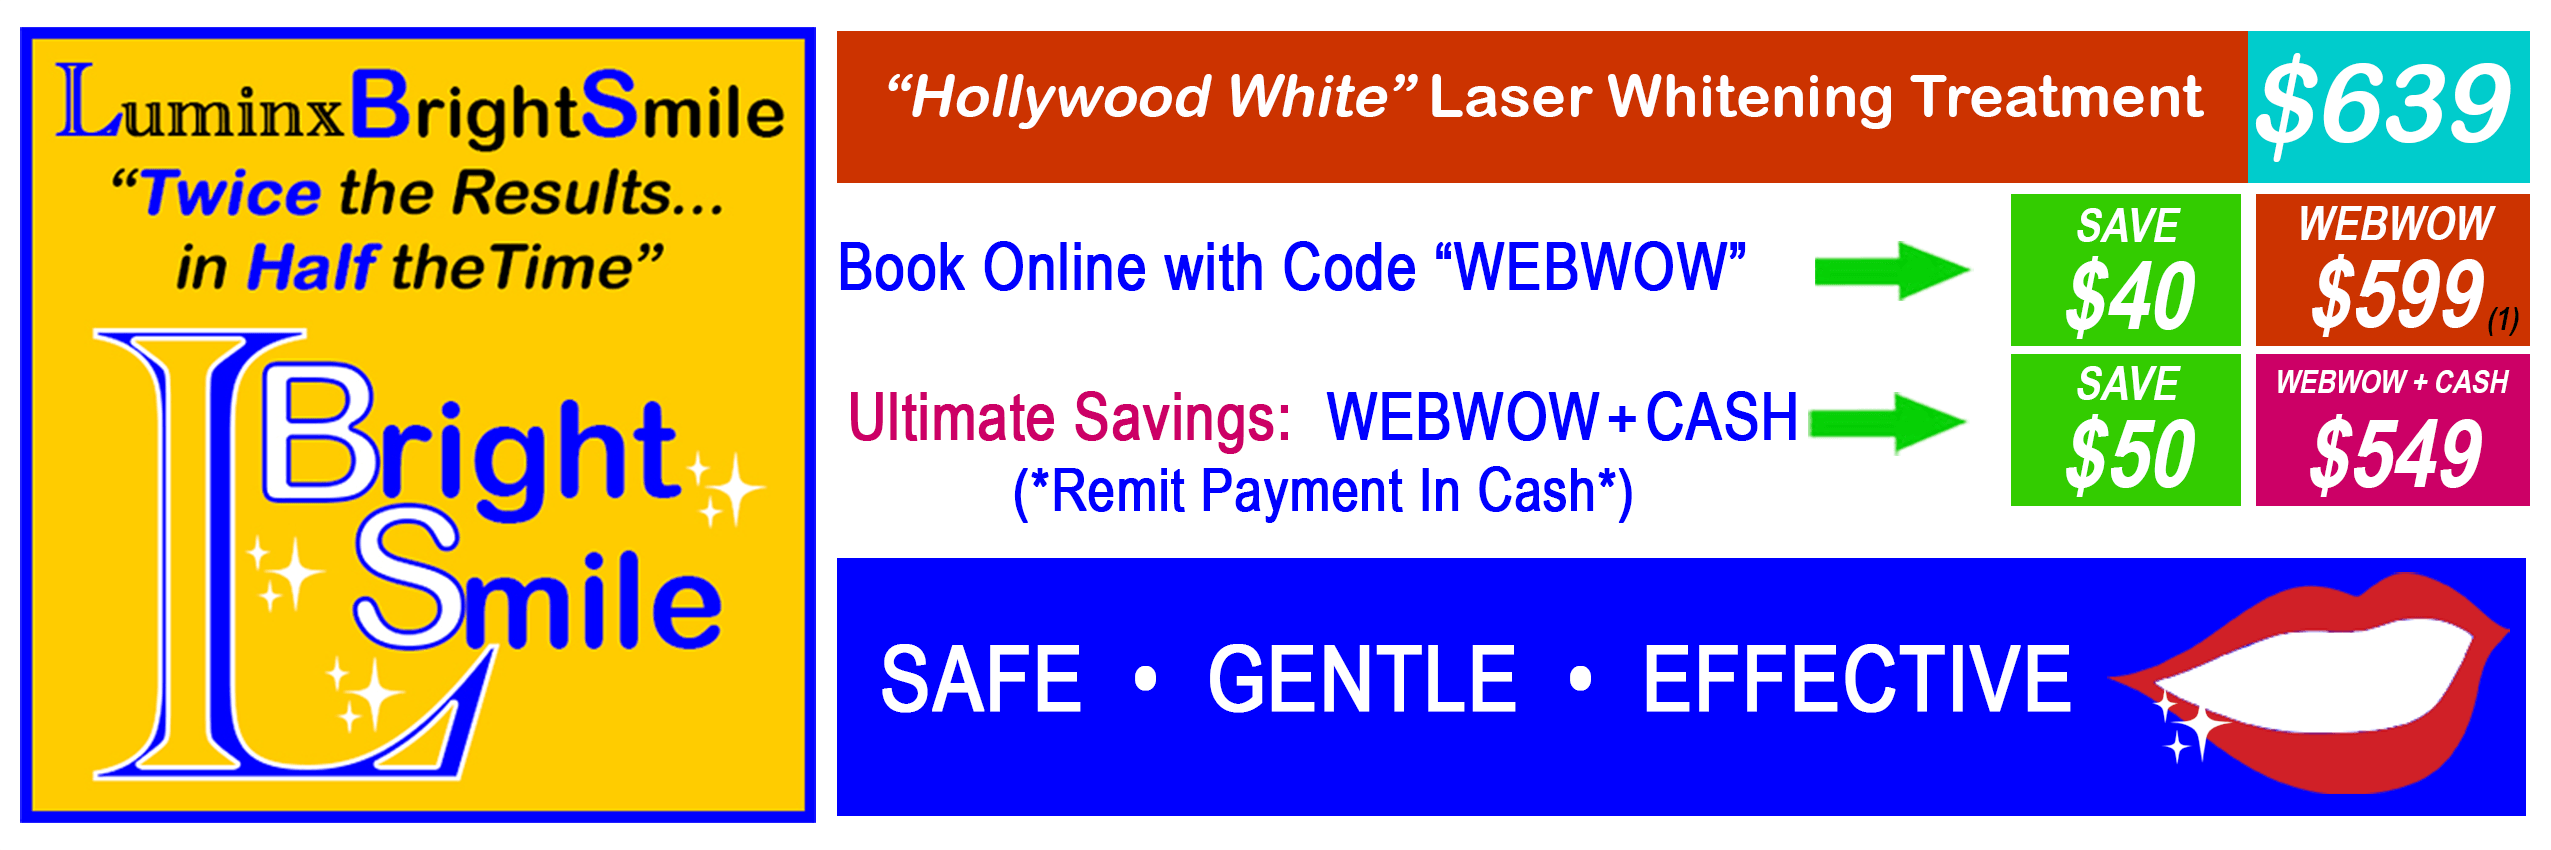 LuminexBrightSmile logo and pricing for Hollywood White Laser Whitening Treatment